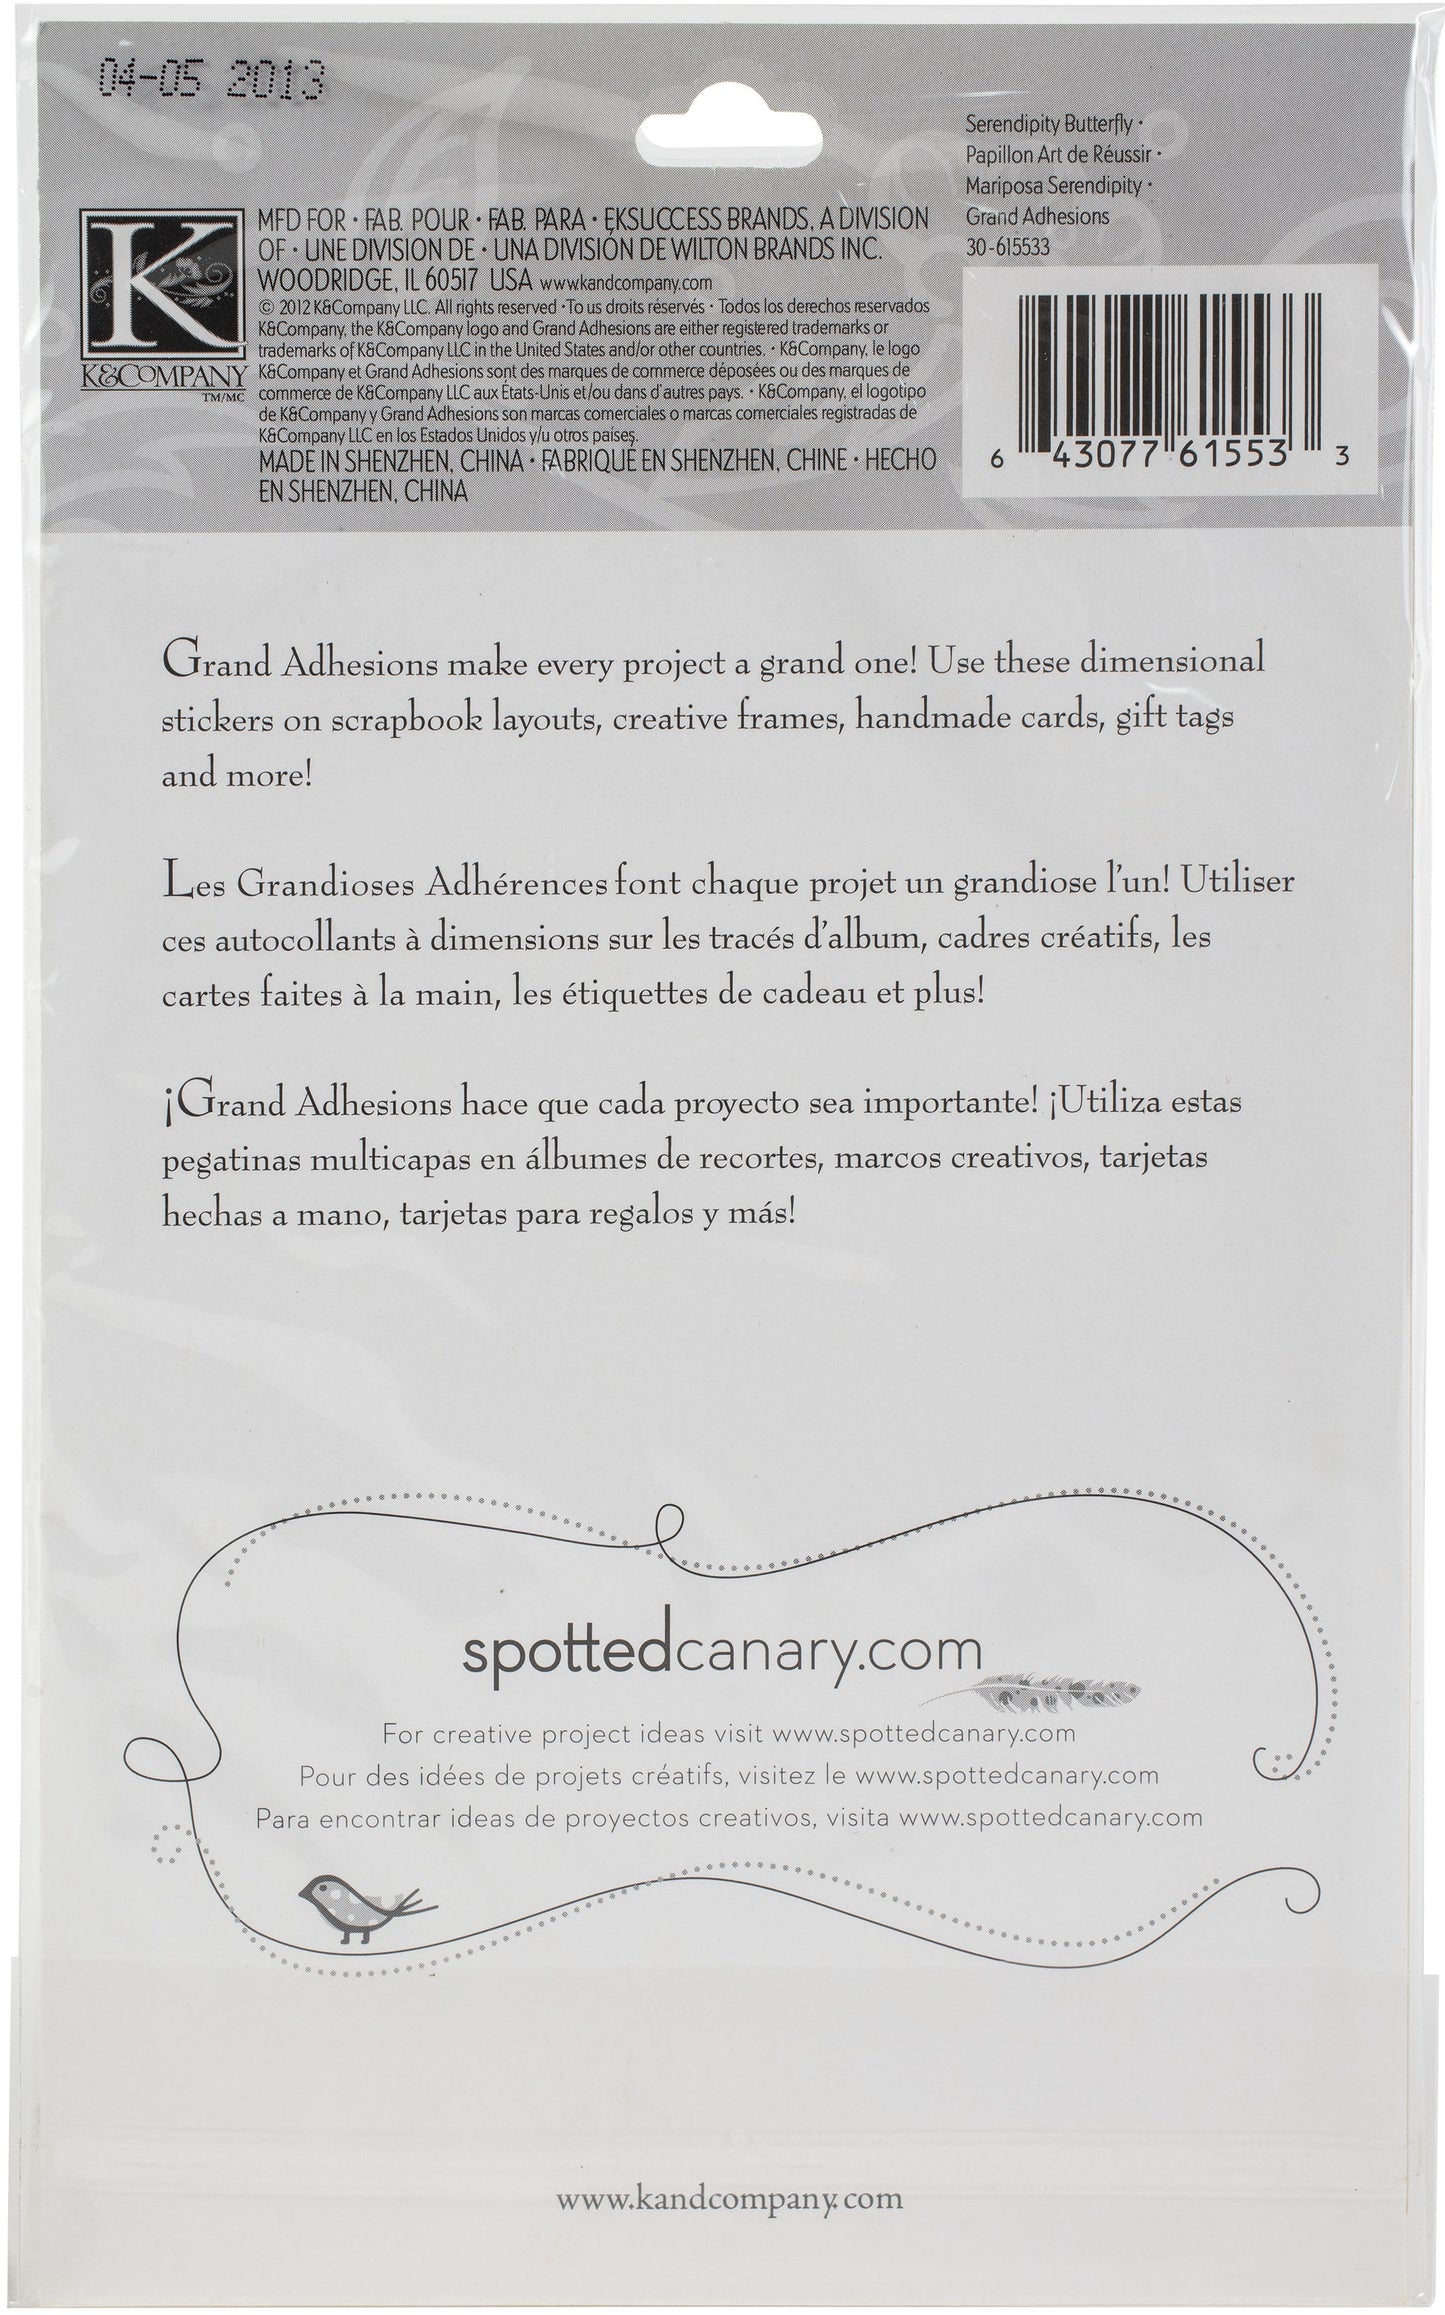 Serendipity Grand Adhesions Dimensional Stickers 15/Pkg-Butterflies